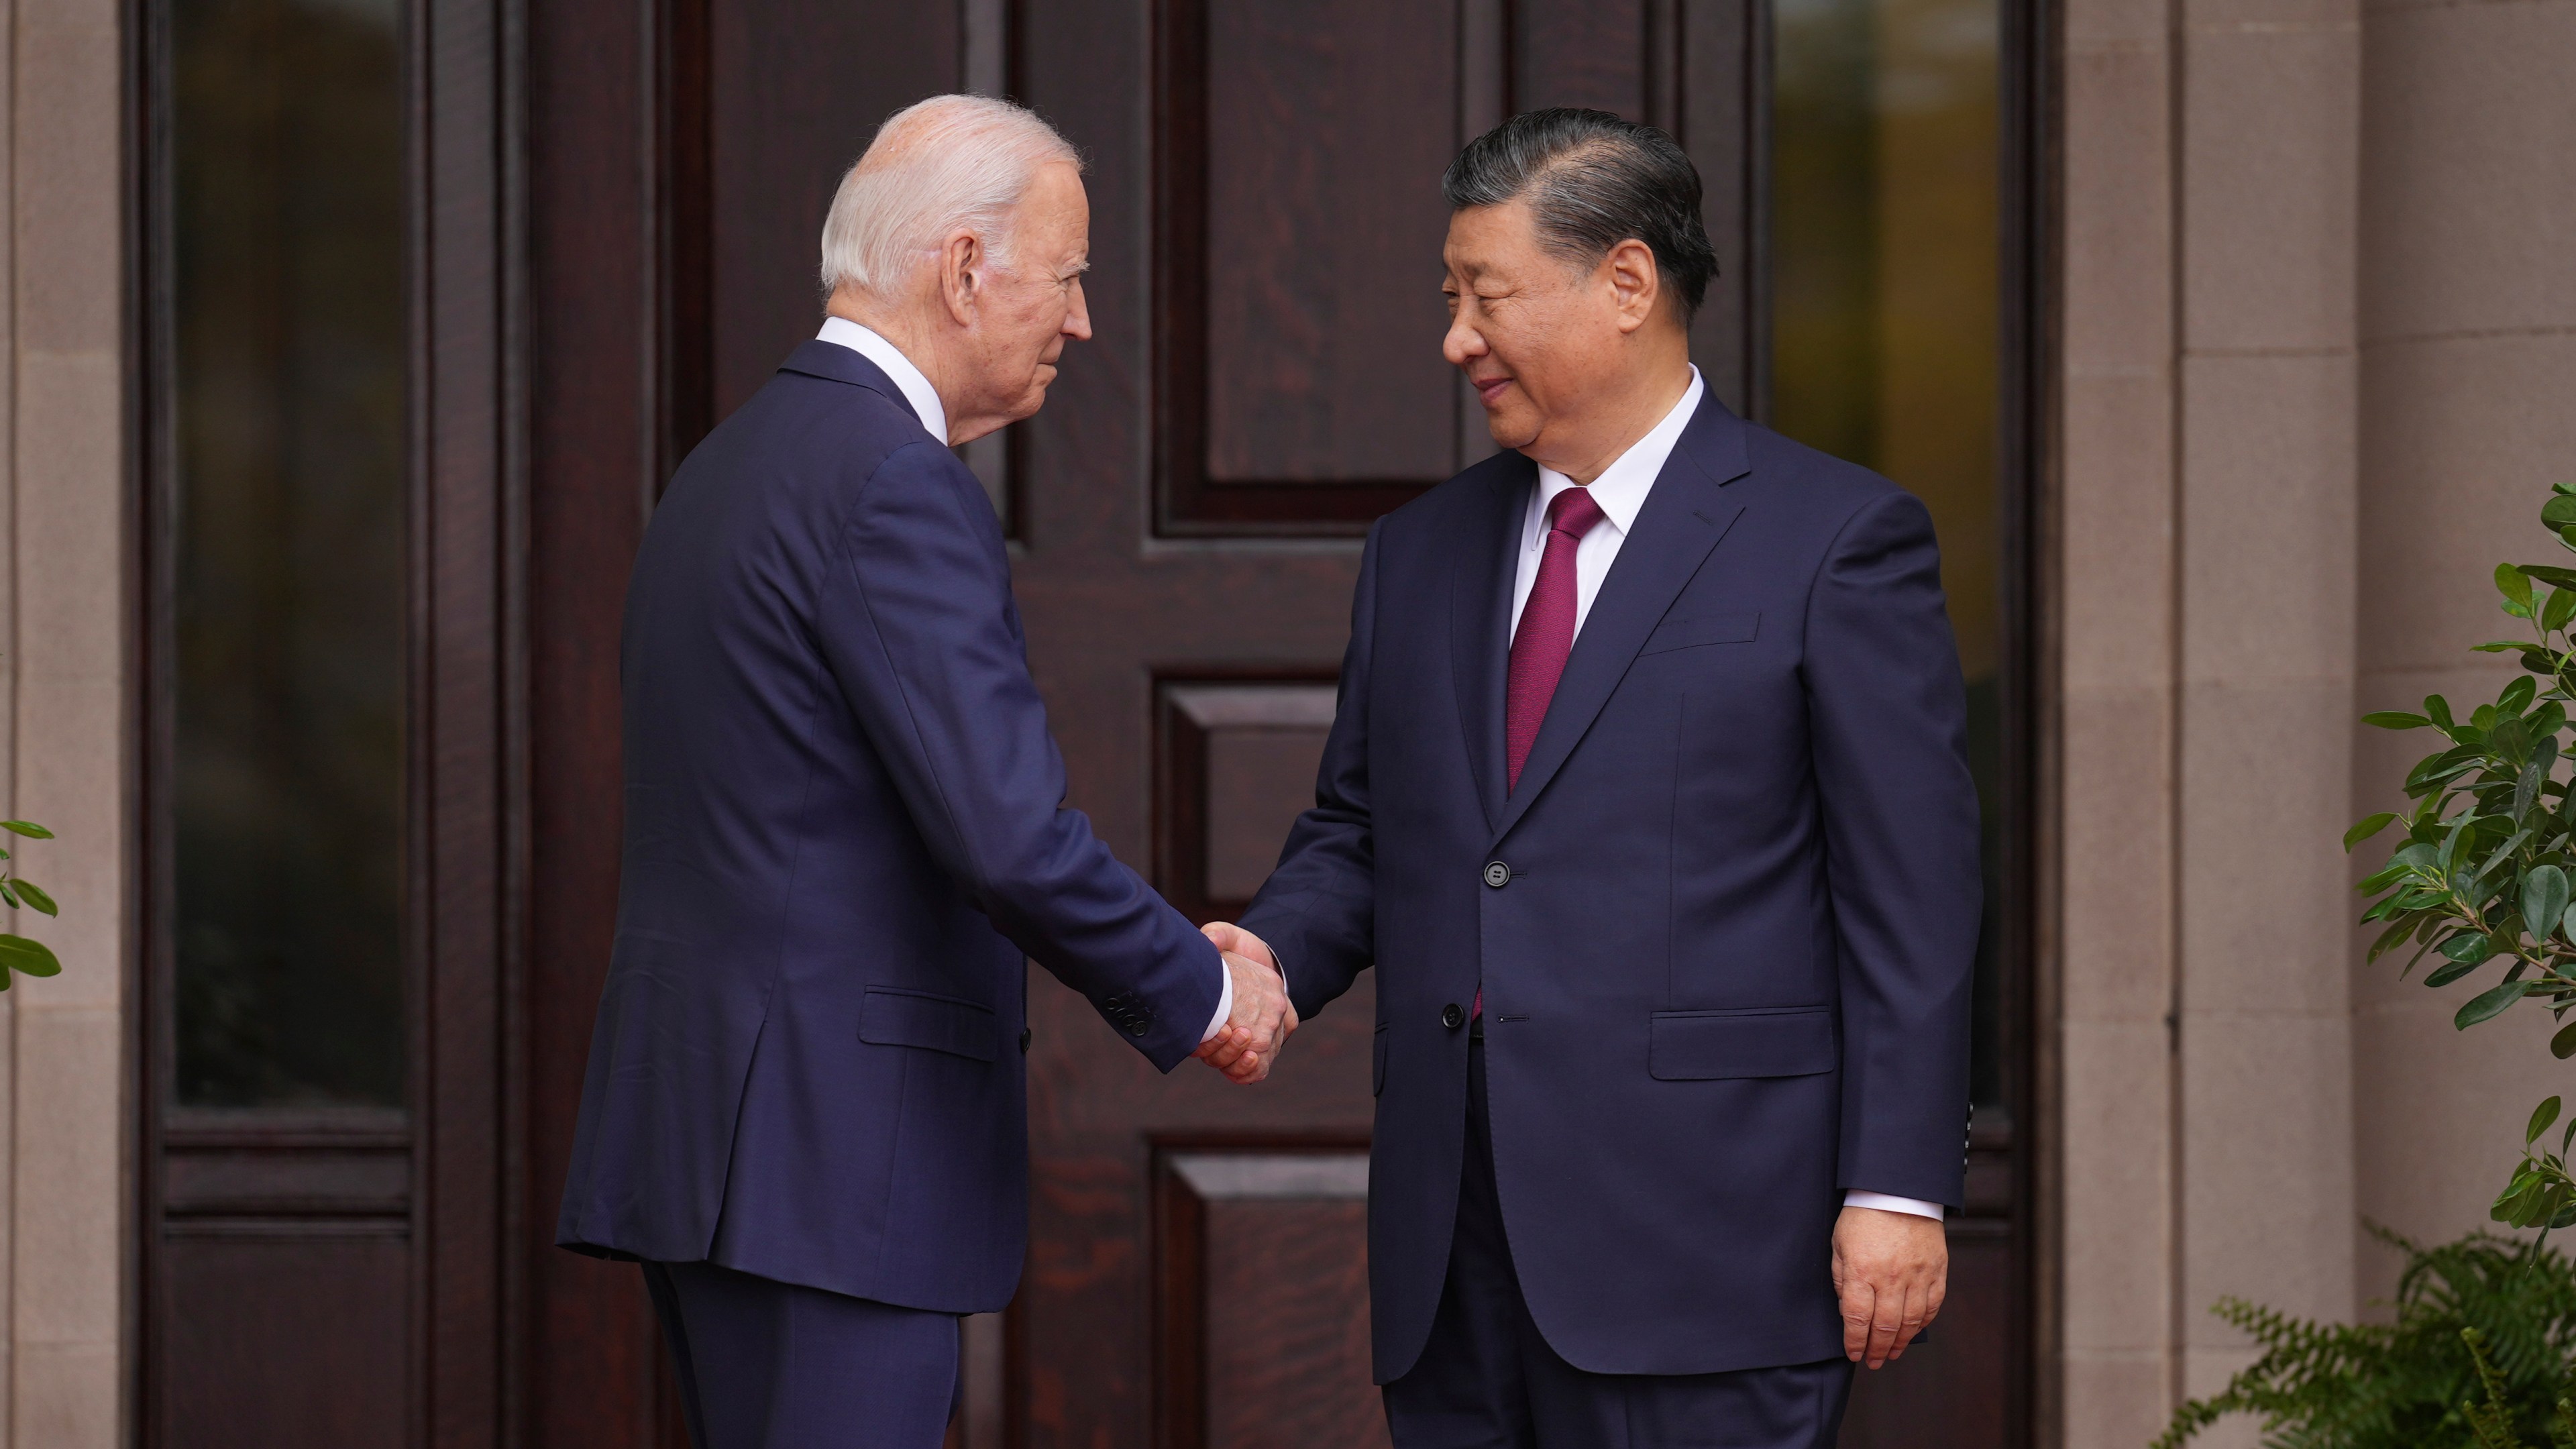 President Joe Biden shakes the hand of China's President President Xi Jinping next to a large wooden door.